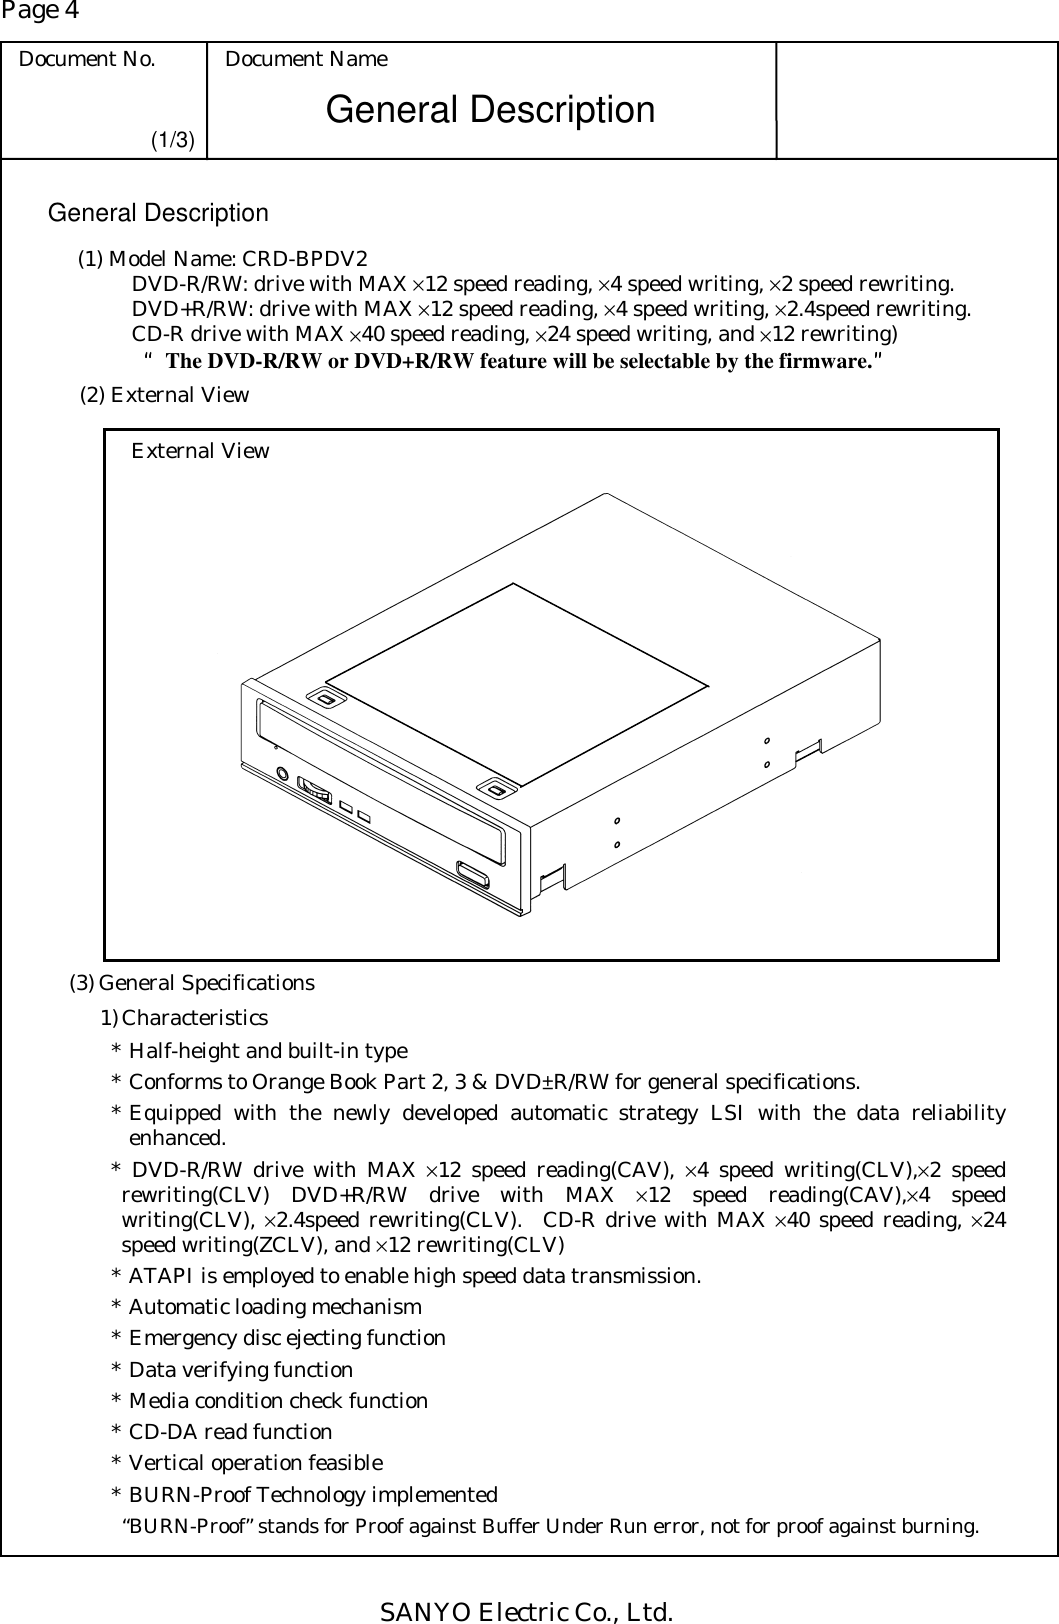 Page 4 Document No.  Document Name SANYO Electric Co., Ltd. General Description (1/3) General Description (1) Model Name: CRD-BPDV2    DVD-R/RW: drive with MAX ×12 speed reading, ×4 speed writing, ×2 speed rewriting.   DVD+R/RW: drive with MAX ×12 speed reading, ×4 speed writing, ×2.4speed rewriting.   CD-R drive with MAX ×40 speed reading, ×24 speed writing, and ×12 rewriting)    ““““The DVD-R/RW or DVD+R/RW feature will be selectable by the firmware.””””   (2) External View External View   (3) General Specifications 1) Characteristics * Half-height and built-in type * Conforms to Orange Book Part 2, 3 &amp; DVD±R/RW for general specifications. * Equipped with the newly developed automatic strategy LSI with the data reliability enhanced. * DVD-R/RW drive with MAX ×12 speed reading(CAV), ×4 speed writing(CLV),×2 speed rewriting(CLV) DVD+R/RW drive with MAX ×12 speed reading(CAV),×4 speed writing(CLV), ×2.4speed rewriting(CLV).  CD-R drive with MAX ×40 speed reading, ×24 speed writing(ZCLV), and ×12 rewriting(CLV) * ATAPI is employed to enable high speed data transmission. * Automatic loading mechanism * Emergency disc ejecting function * Data verifying function * Media condition check function * CD-DA read function * Vertical operation feasible * BURN-Proof Technology implemented   “BURN-Proof” stands for Proof against Buffer Under Run error, not for proof against burning. 